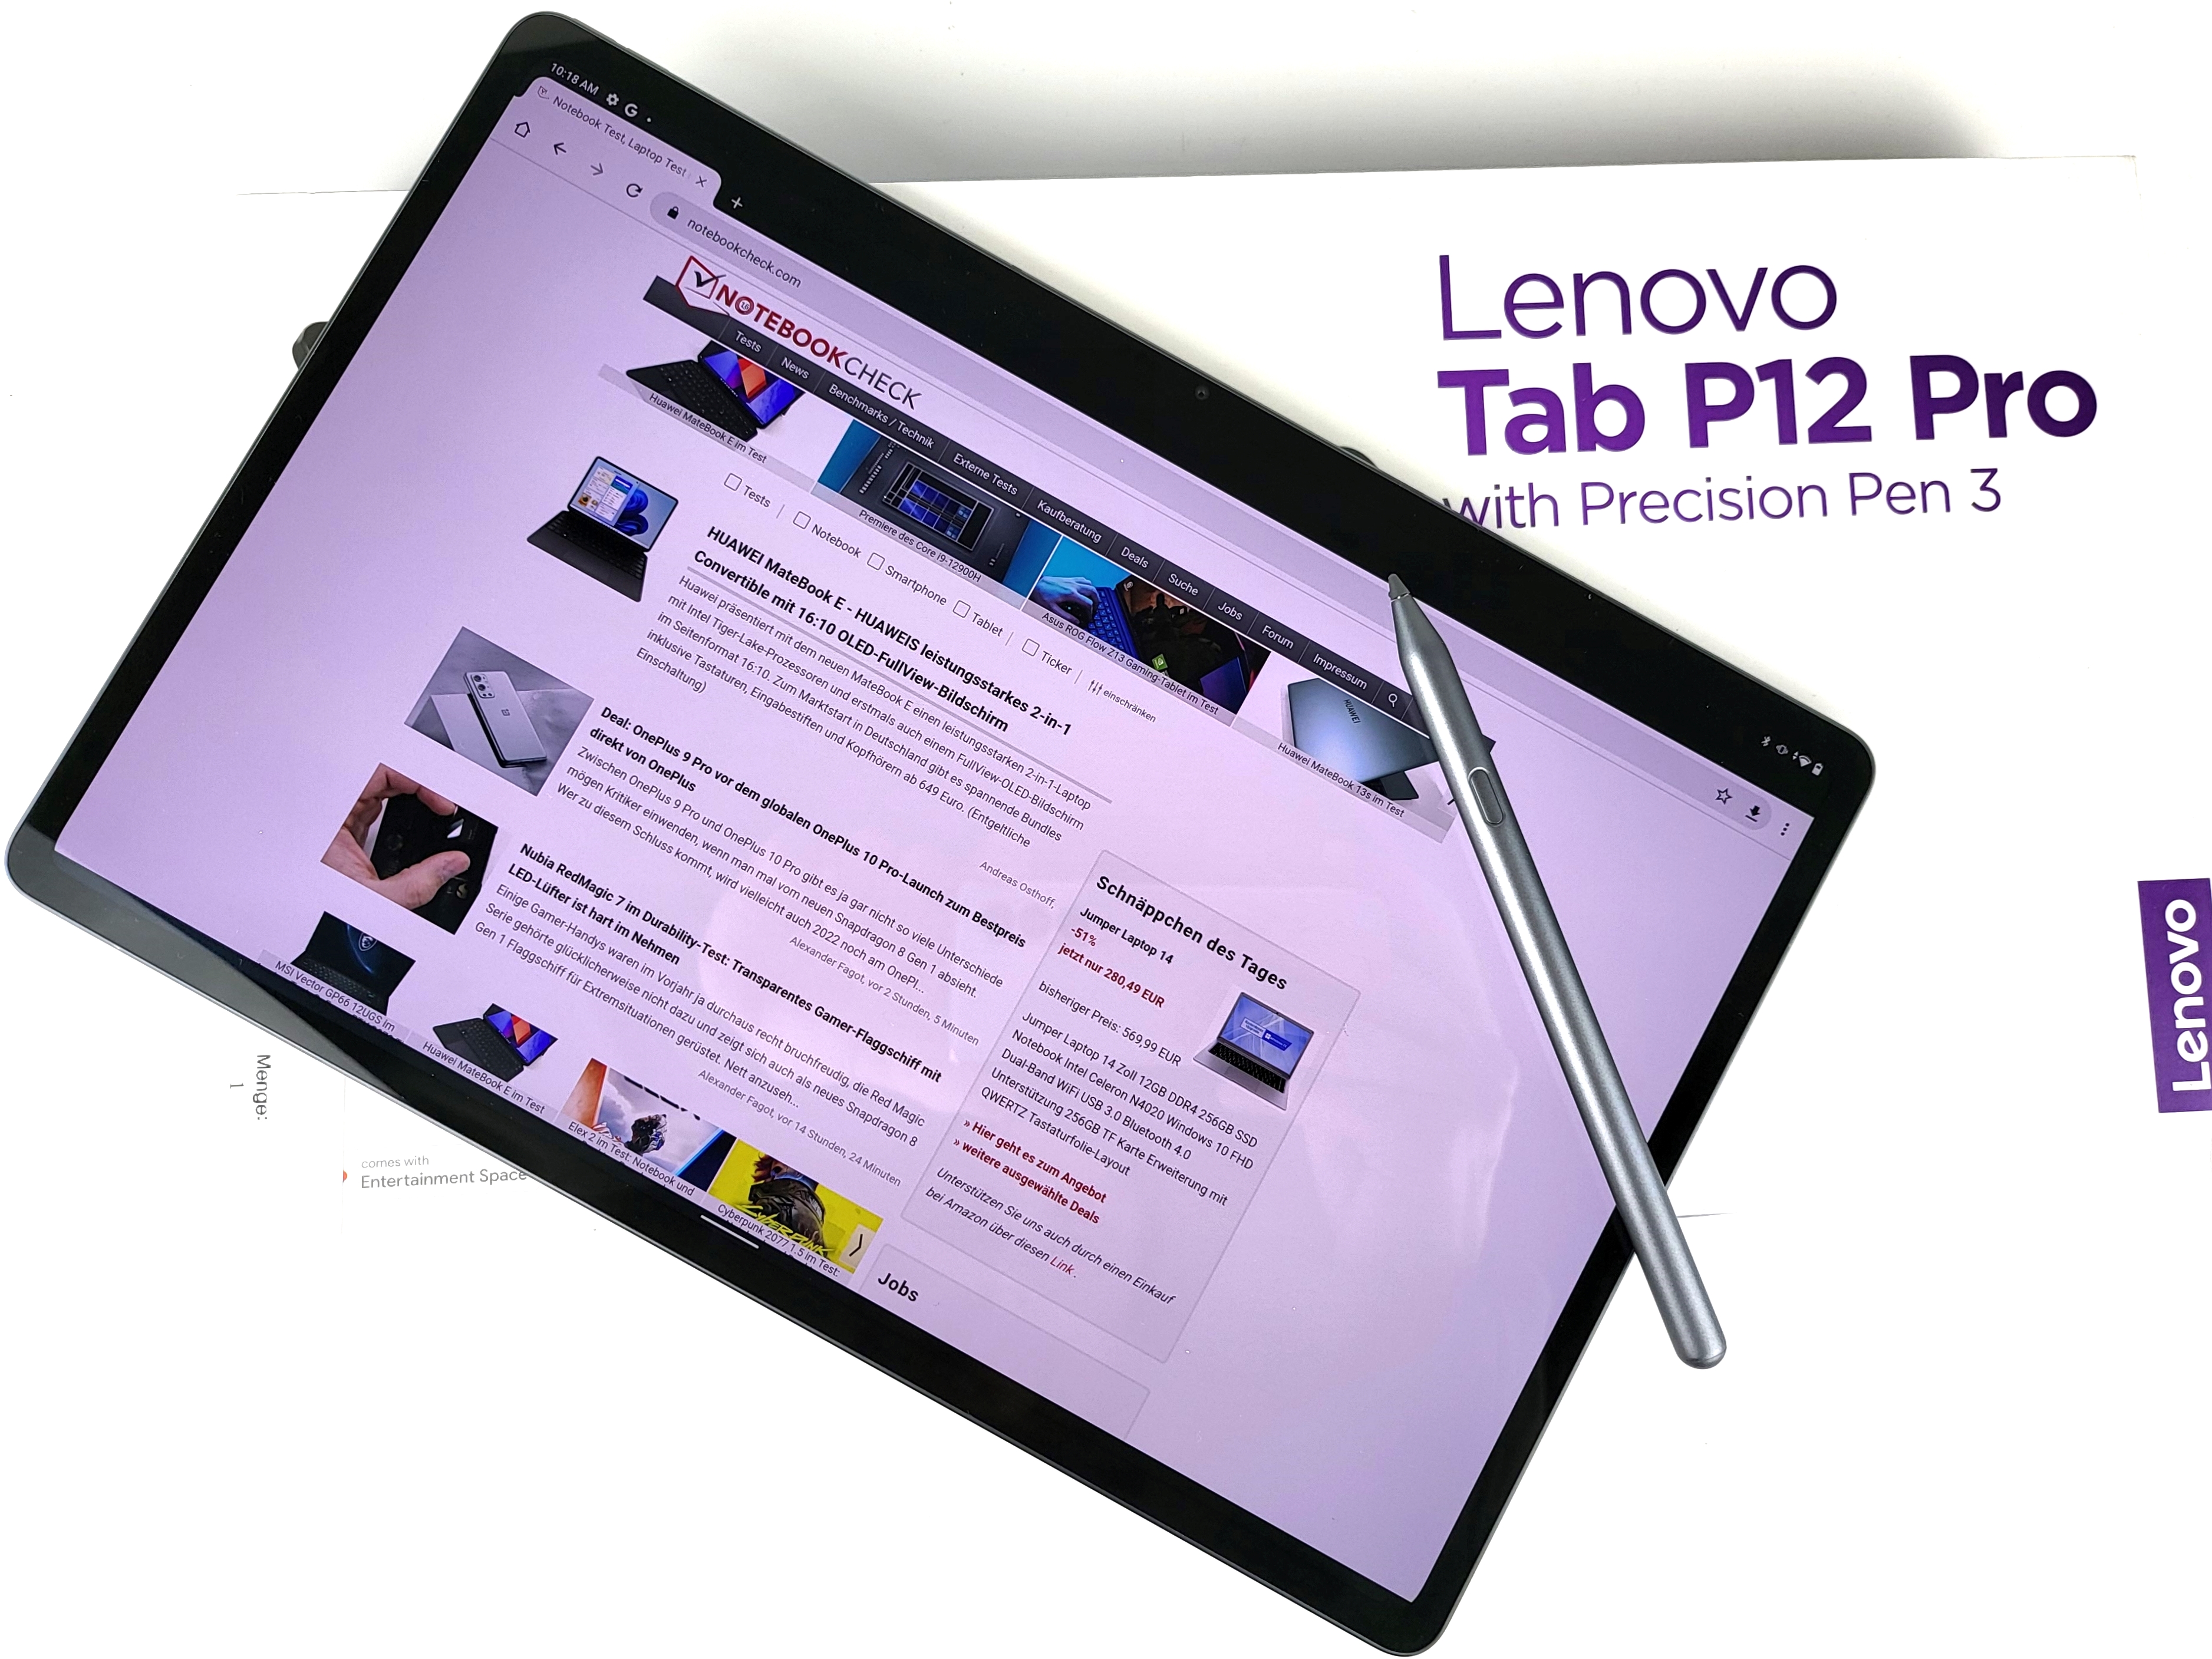 Buy Lenovo Tab P12 from £367.99 (Today) – Best Deals on